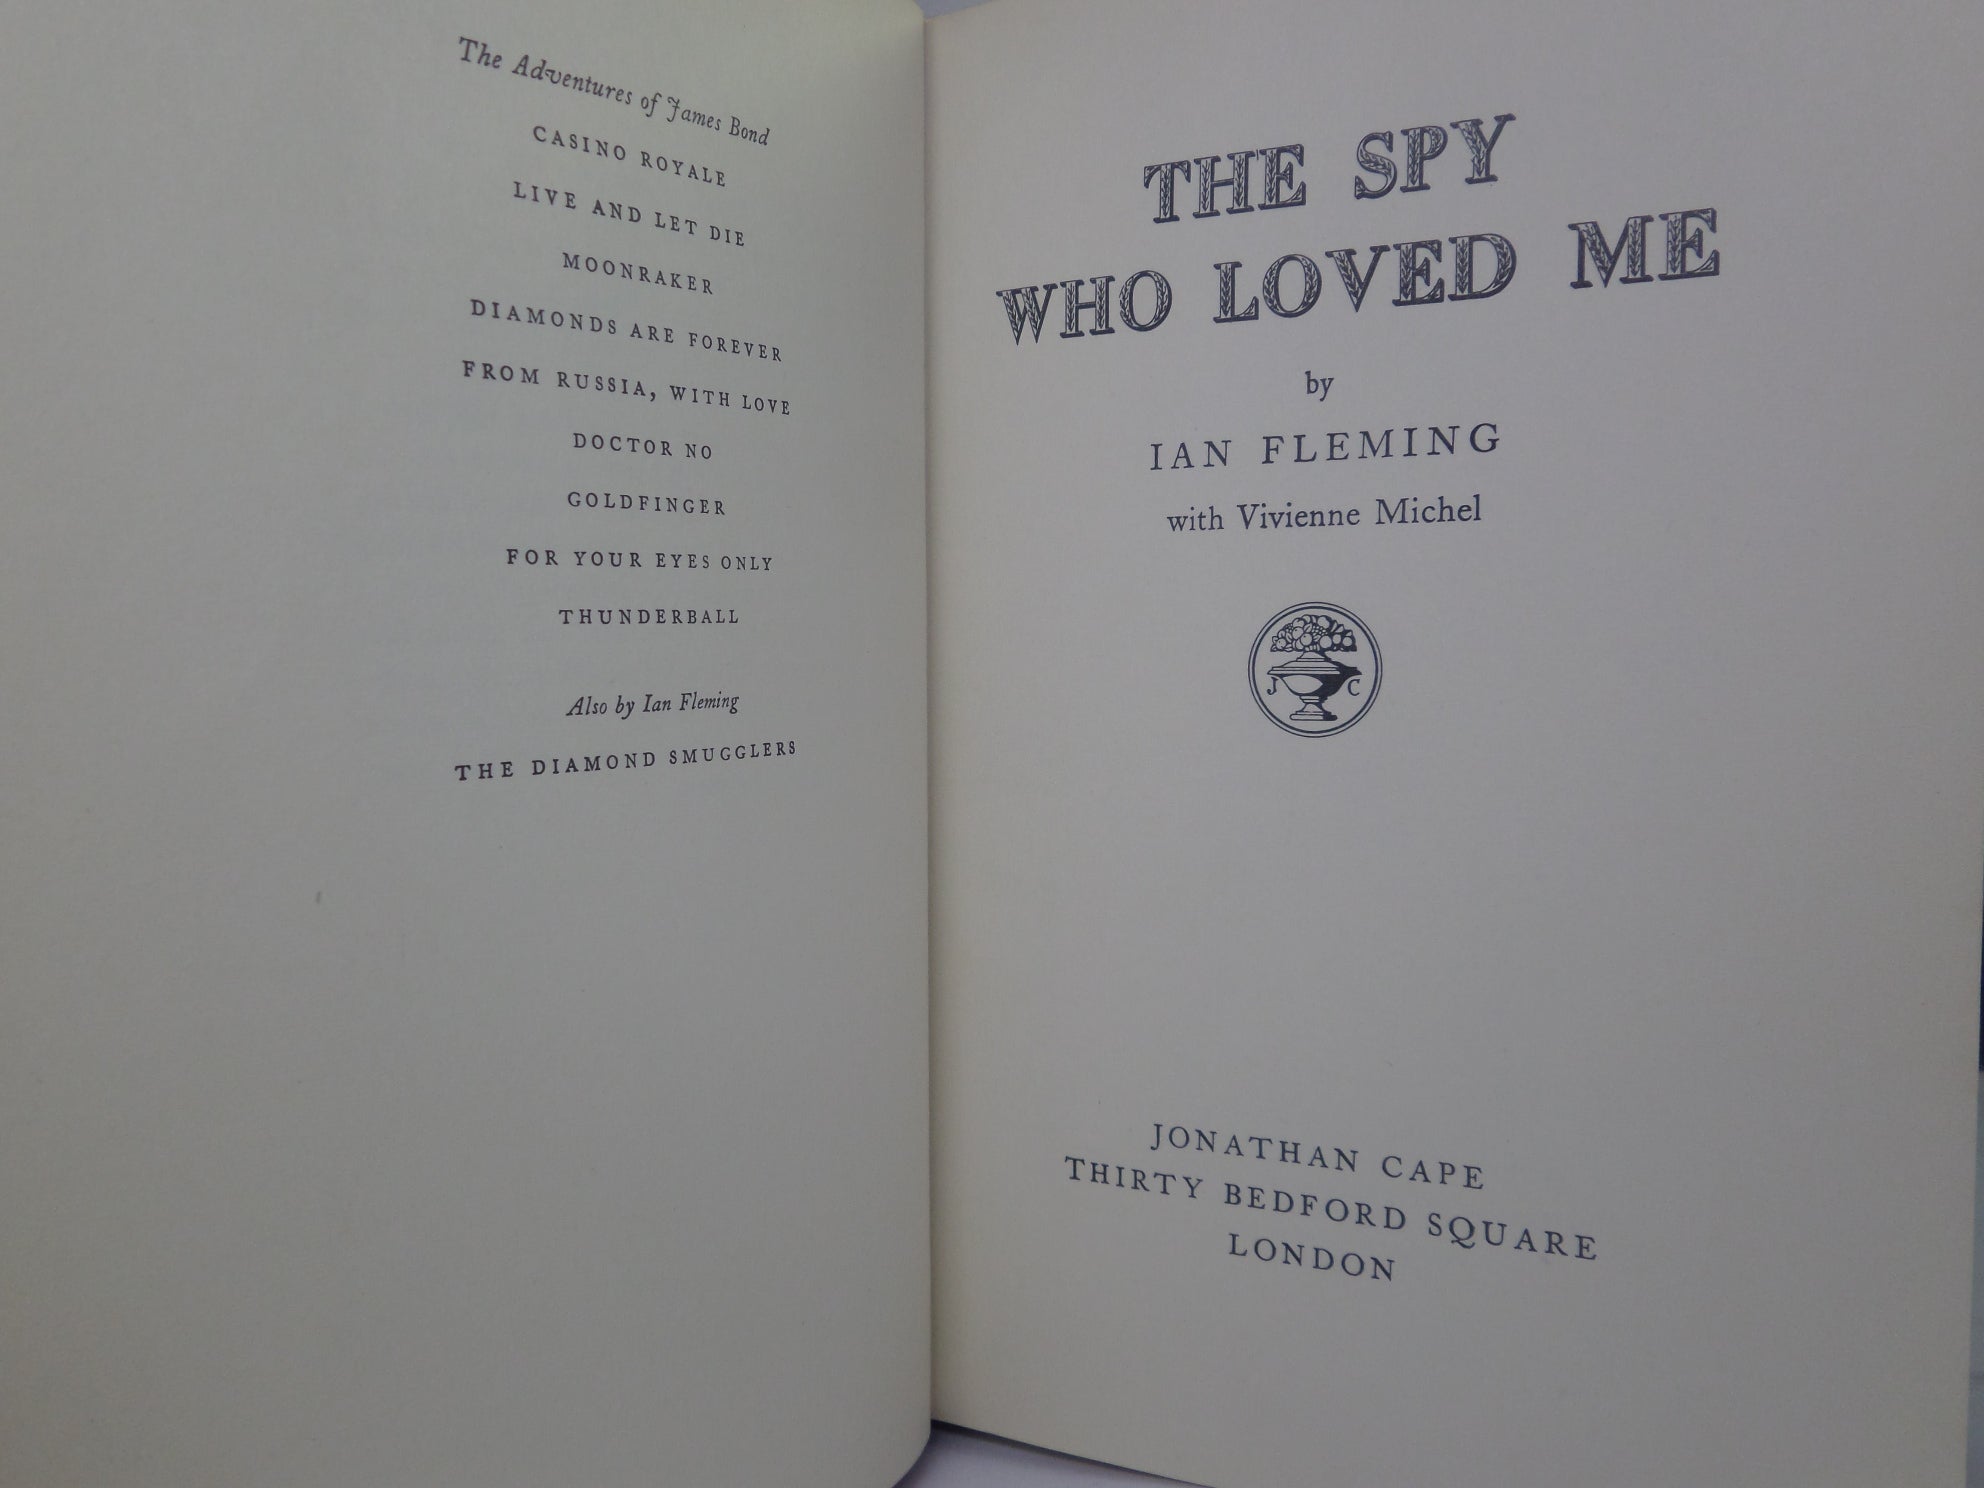 THE SPY WHO LOVED ME BY IAN FLEMING 1962 FIRST EDITION